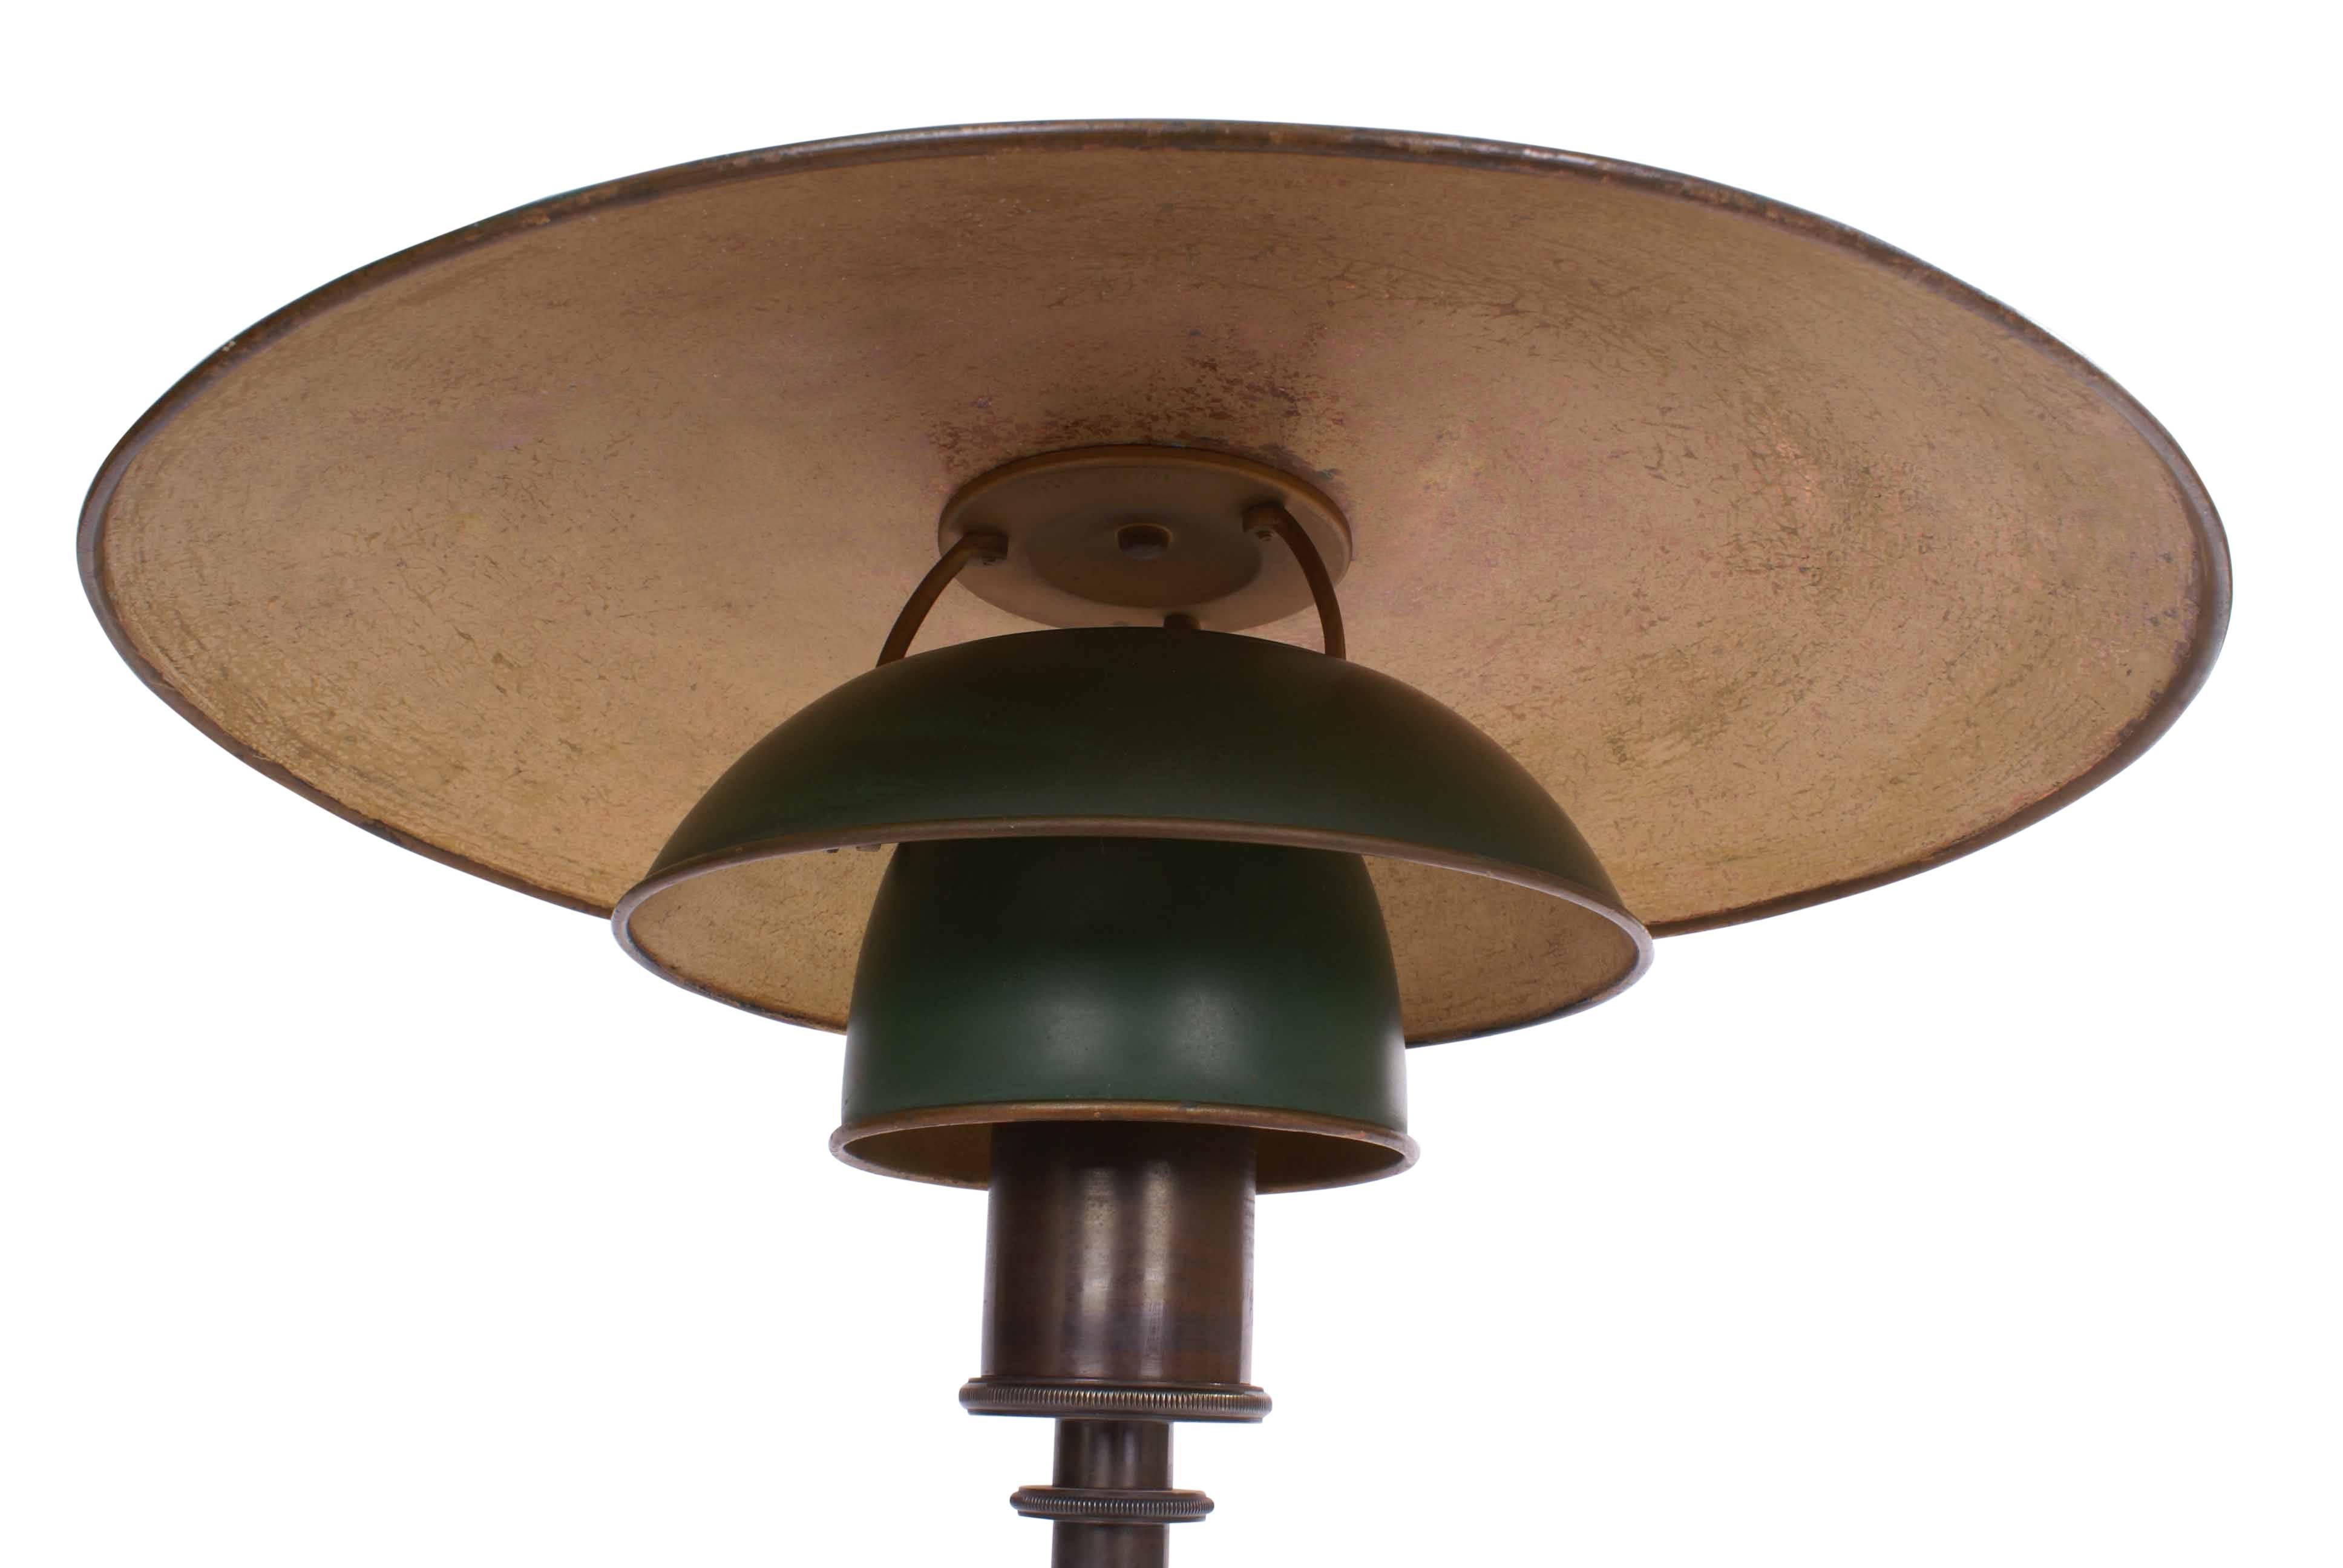 Danish Poul Henningsen 'PH 4/3' Desk Lamp with Green Copper Shades, 1926-1928 For Sale